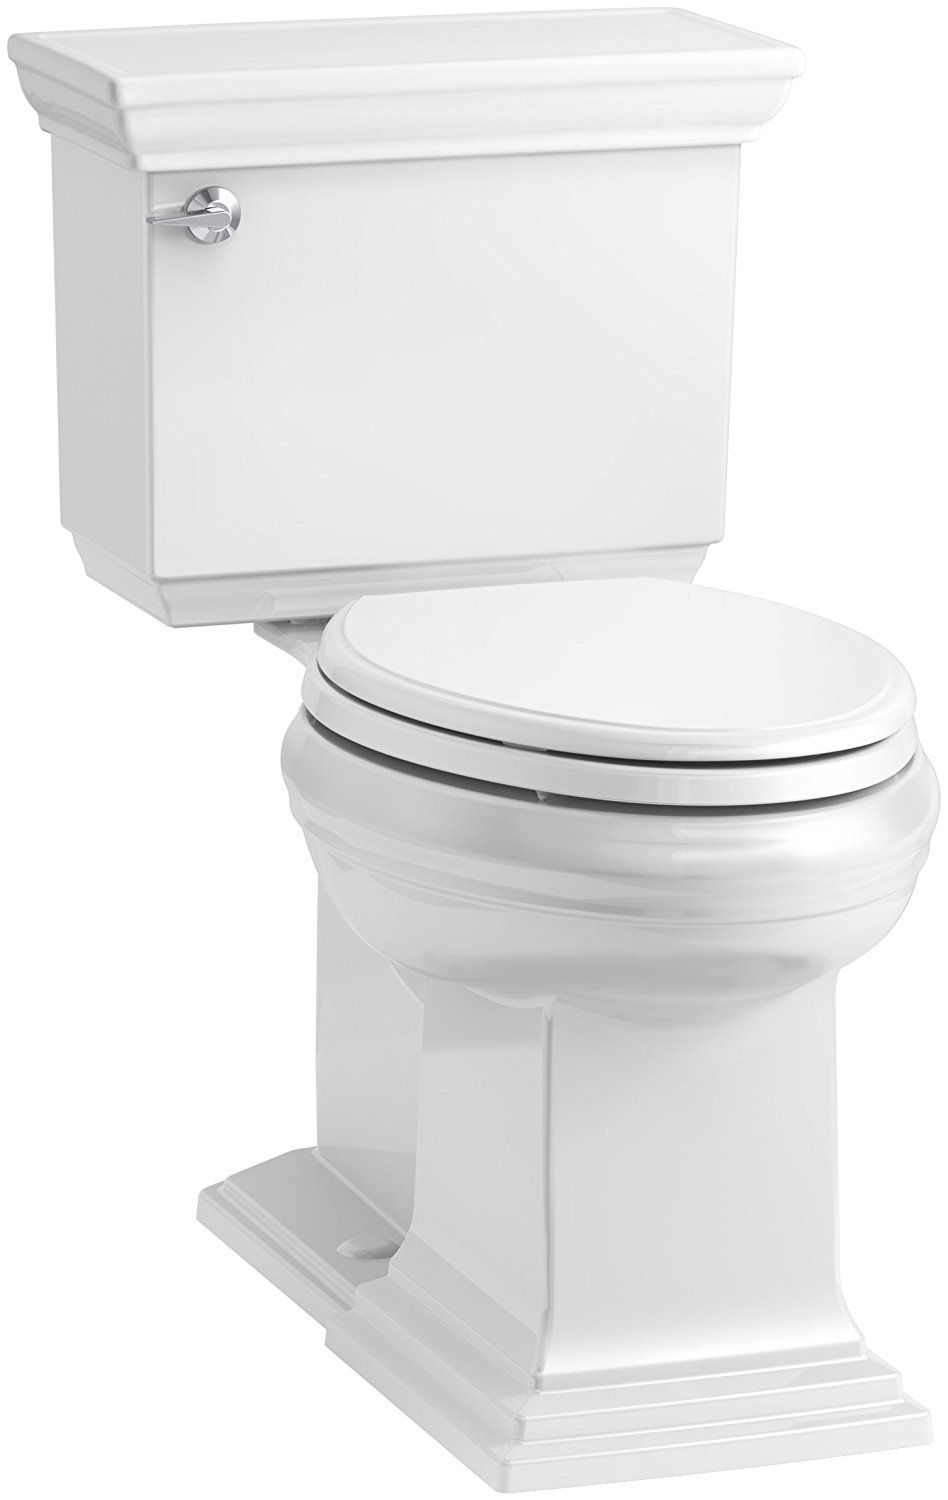 KOHLER K-6669-0 Memoirs Stately Comfort Height Elongated 1.28 GPF Toilet with Aqua Piston Flush Technology, Concealed Trap Way and Left-Hand Trip Lever (2 Piece), White